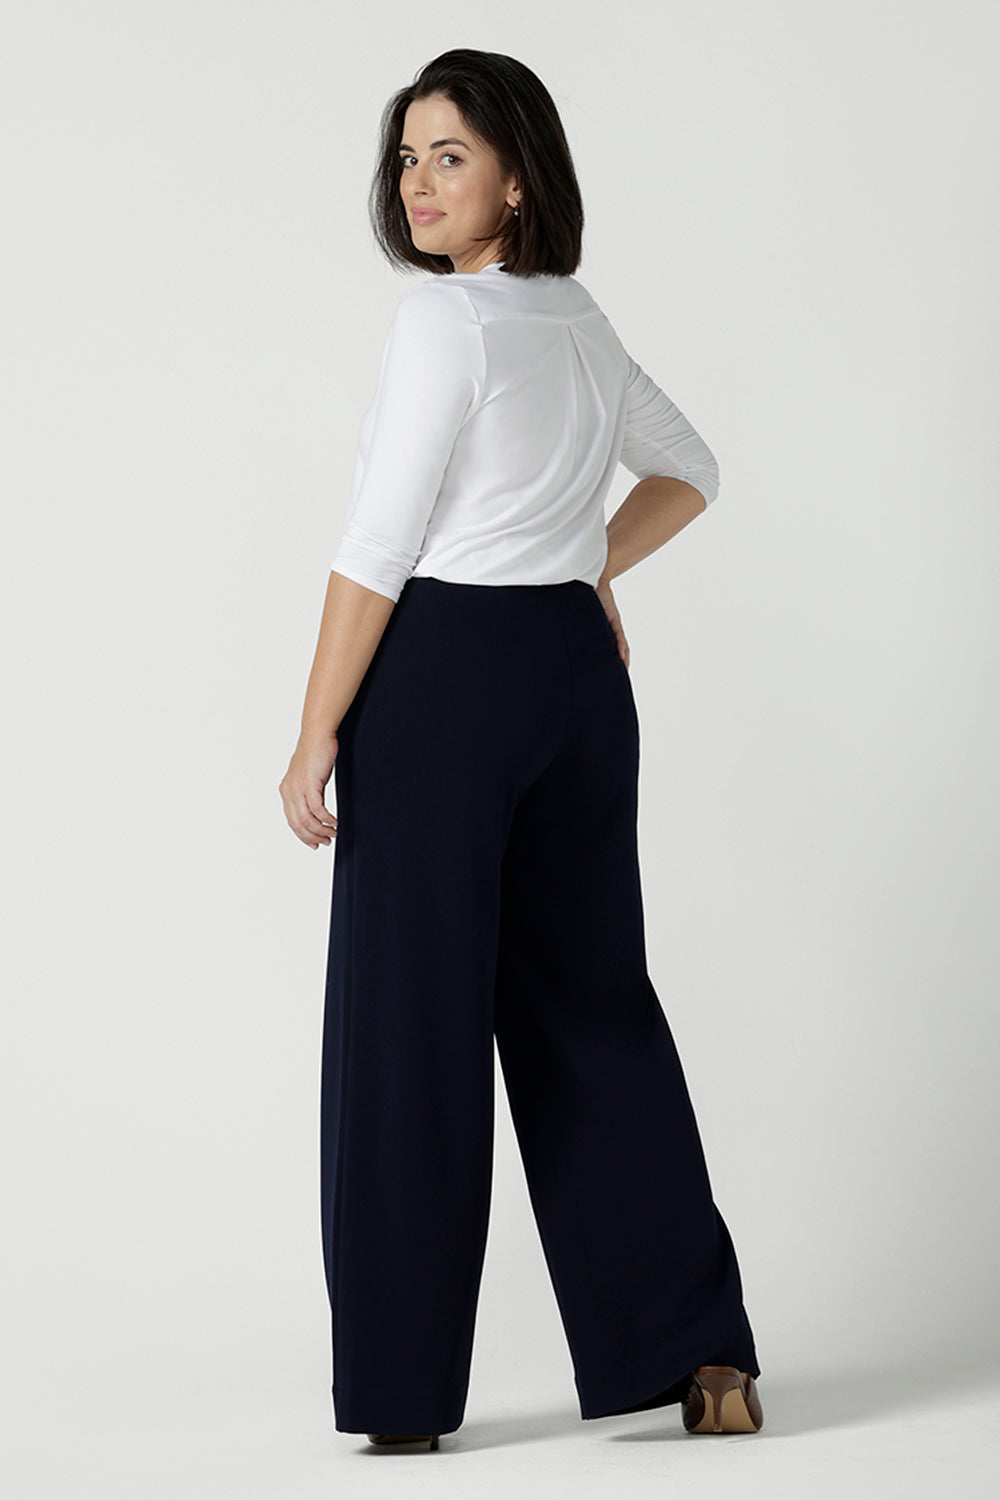 Back view of a size 10 model wears the Navy wide leg pant with navy scuba crepe. High waisted and tailored with belt loops. Stylish and corporate workwear for women size 8 - 24. Made in Australia. Styled back with a white Jaime top in soft bamboo.